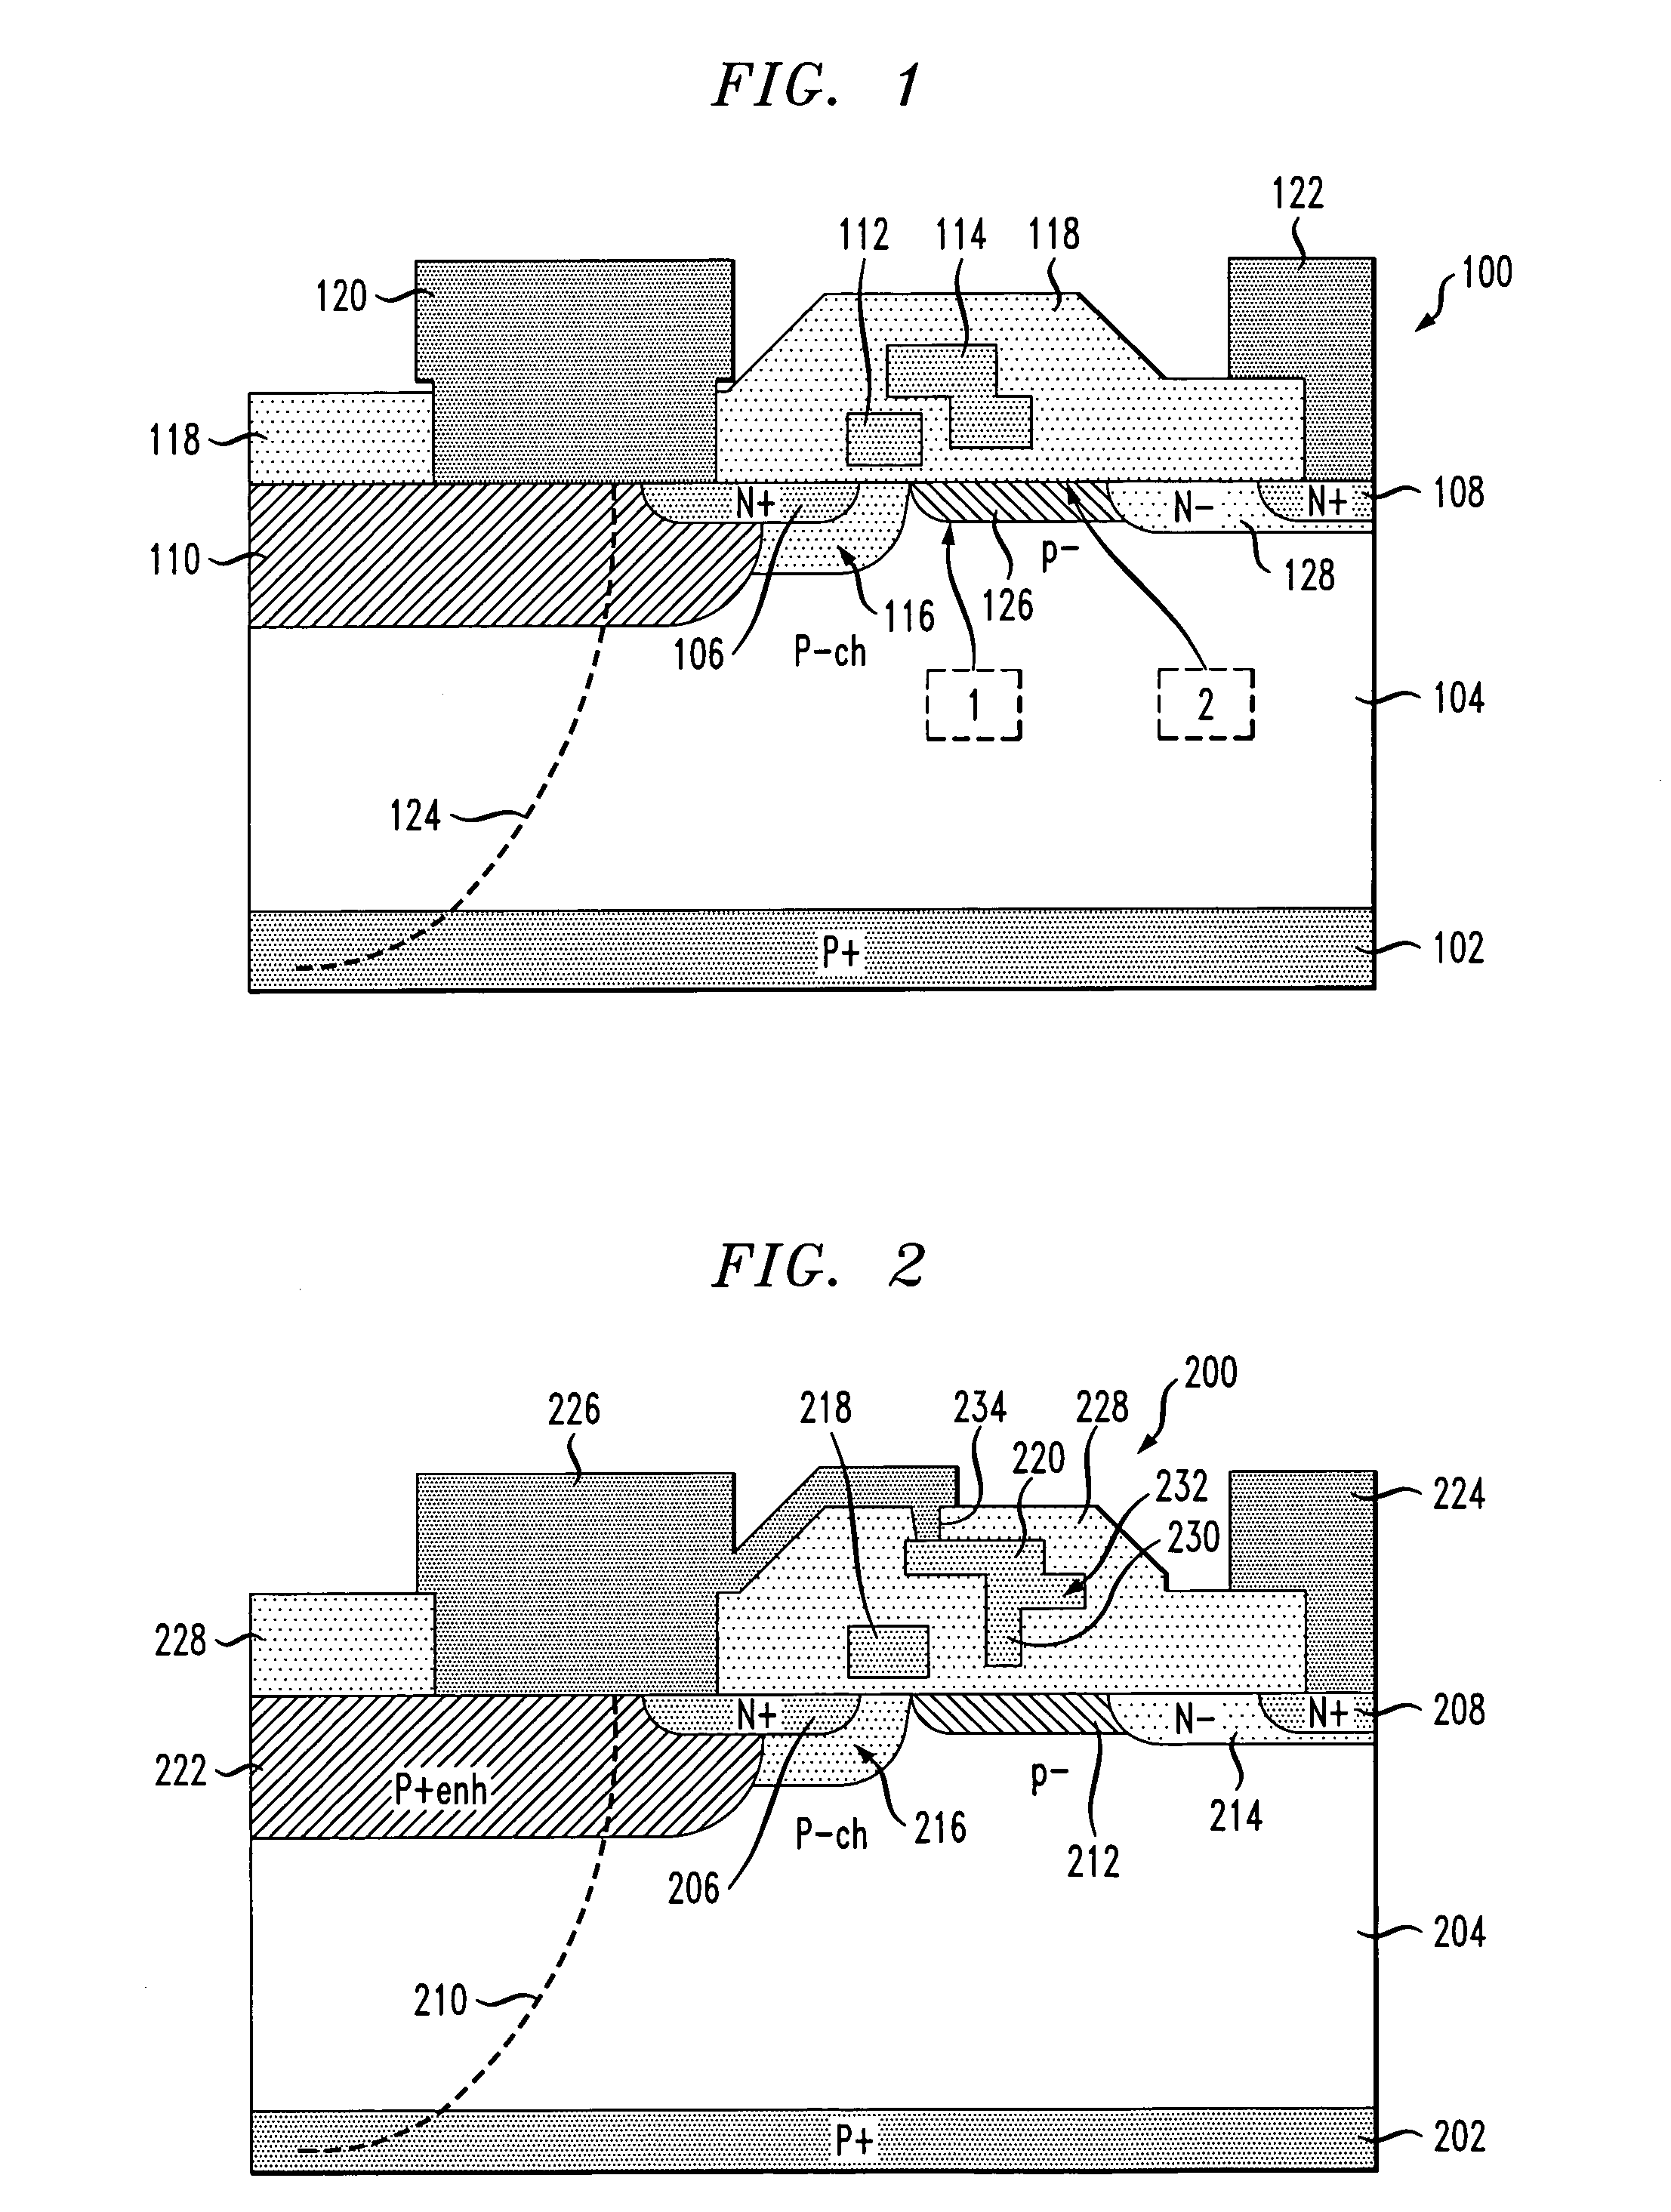 Graded conductive structure for use in a metal-oxide-semiconductor device